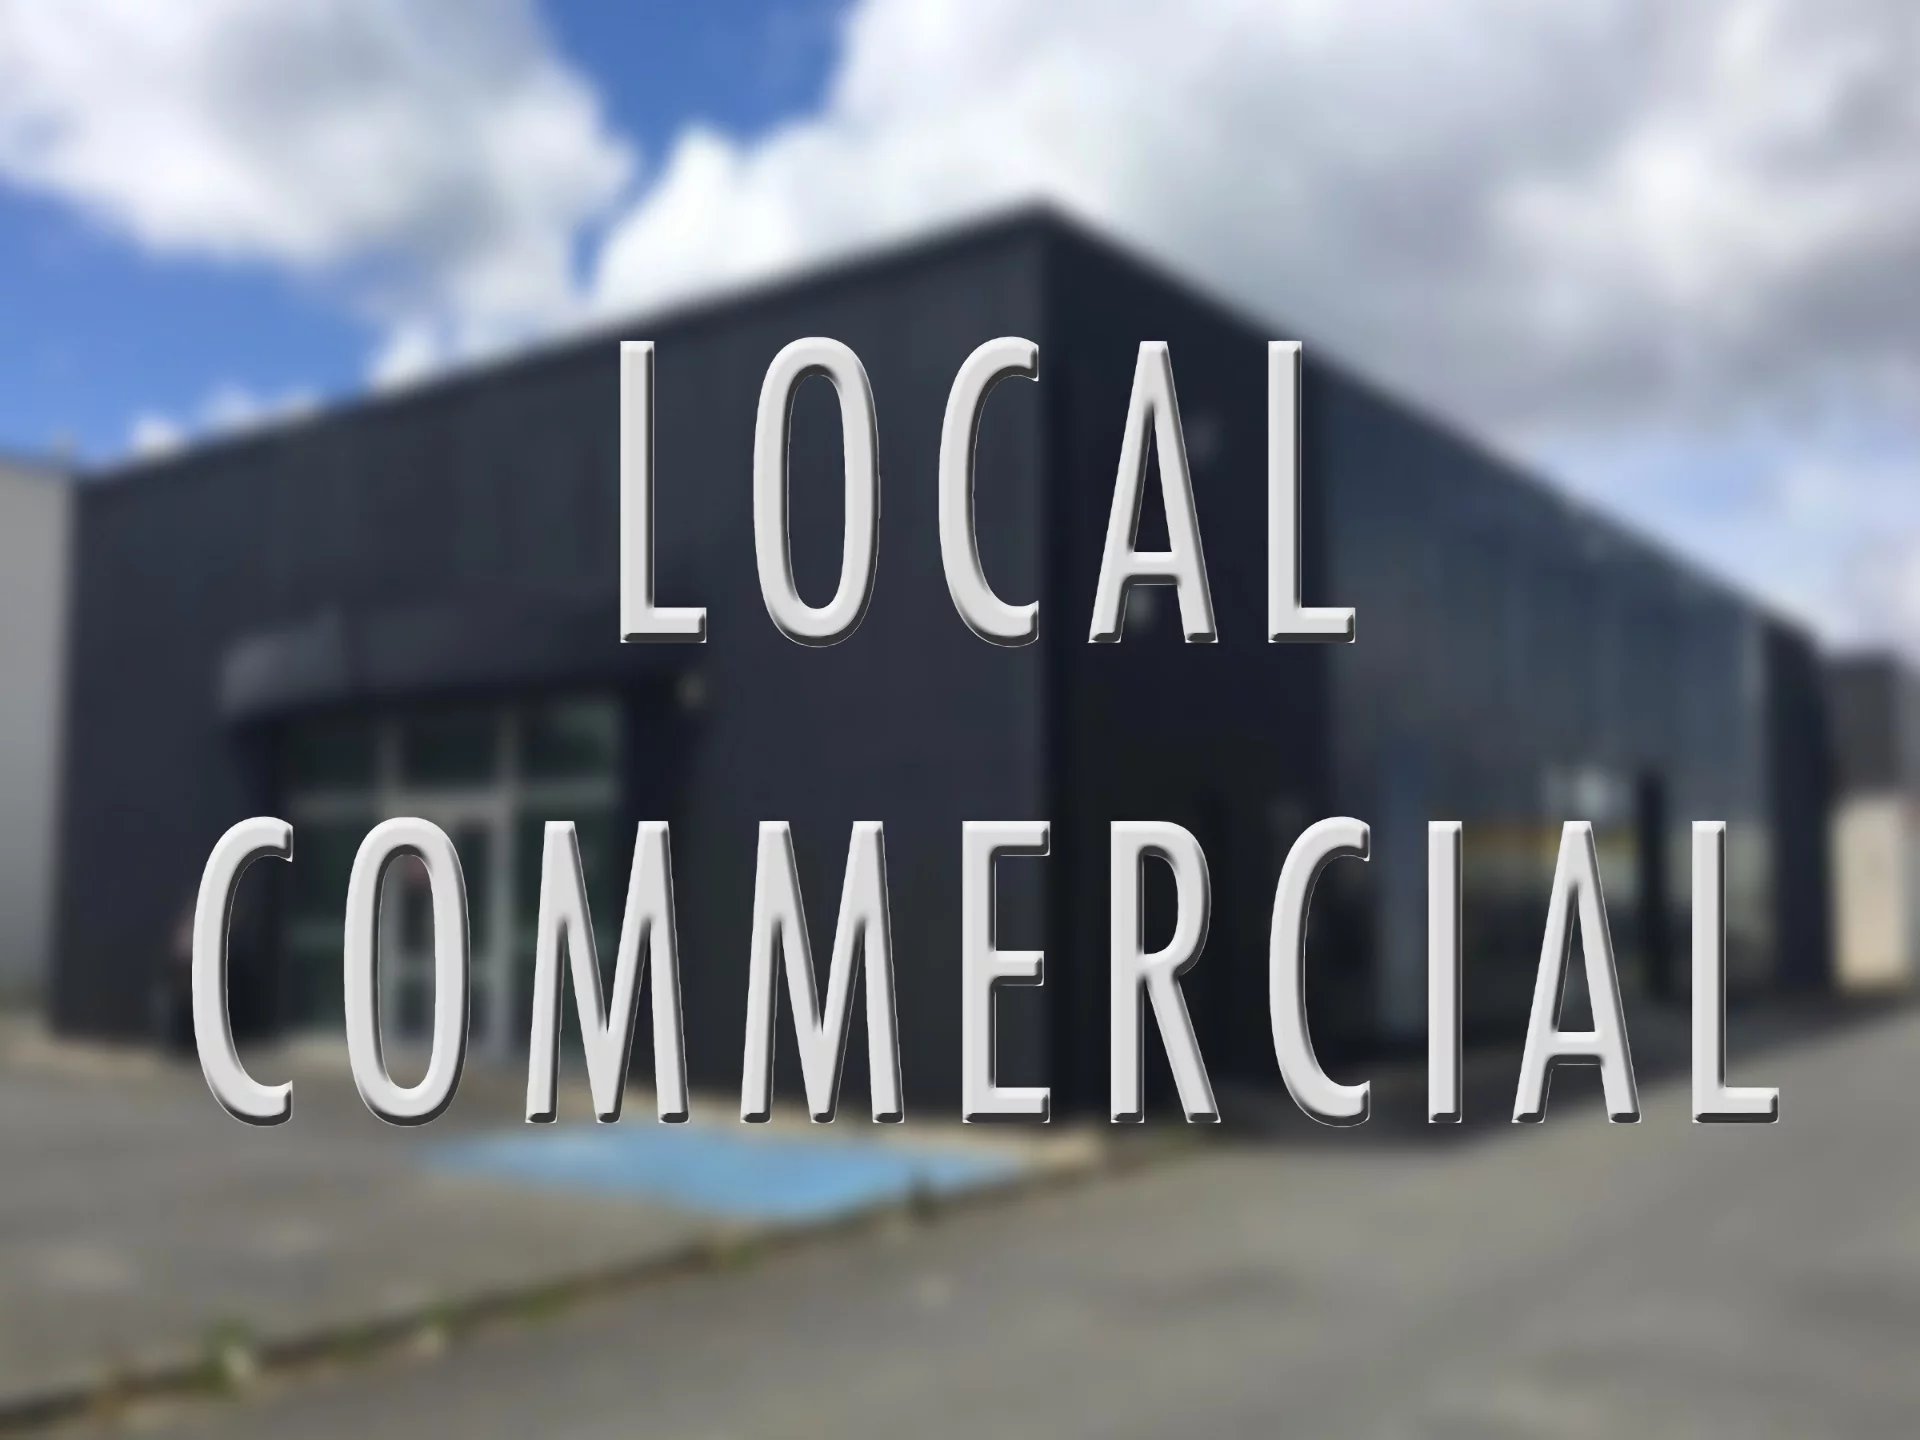 LOCAL COMMERCIAL